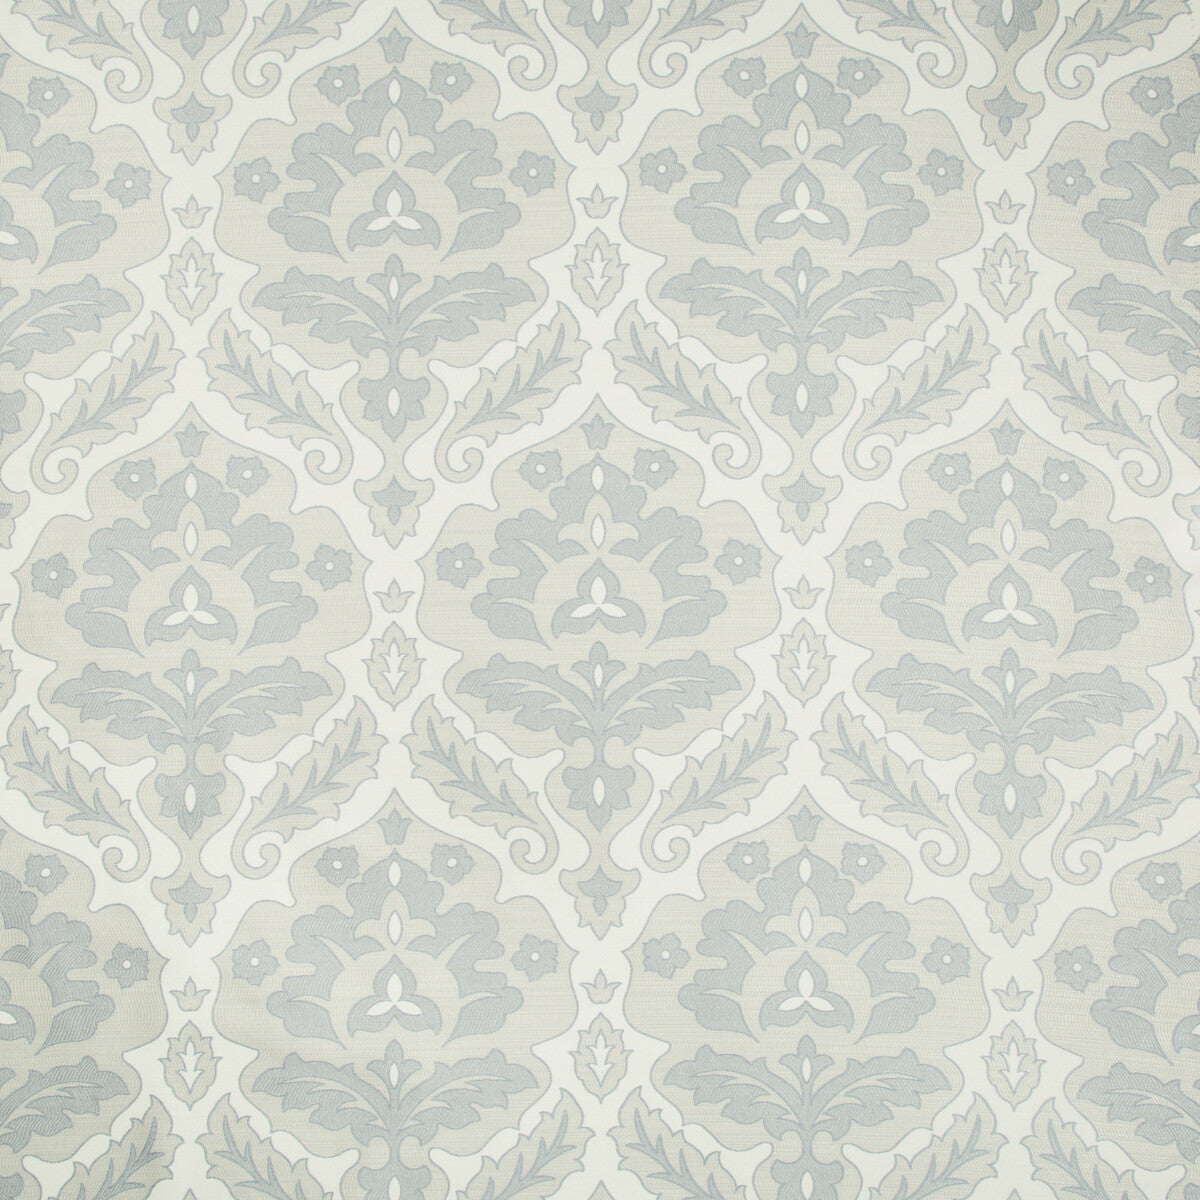 Kravet Contract fabric in 34773-115 color - pattern 34773.115.0 - by Kravet Contract in the Crypton Incase collection